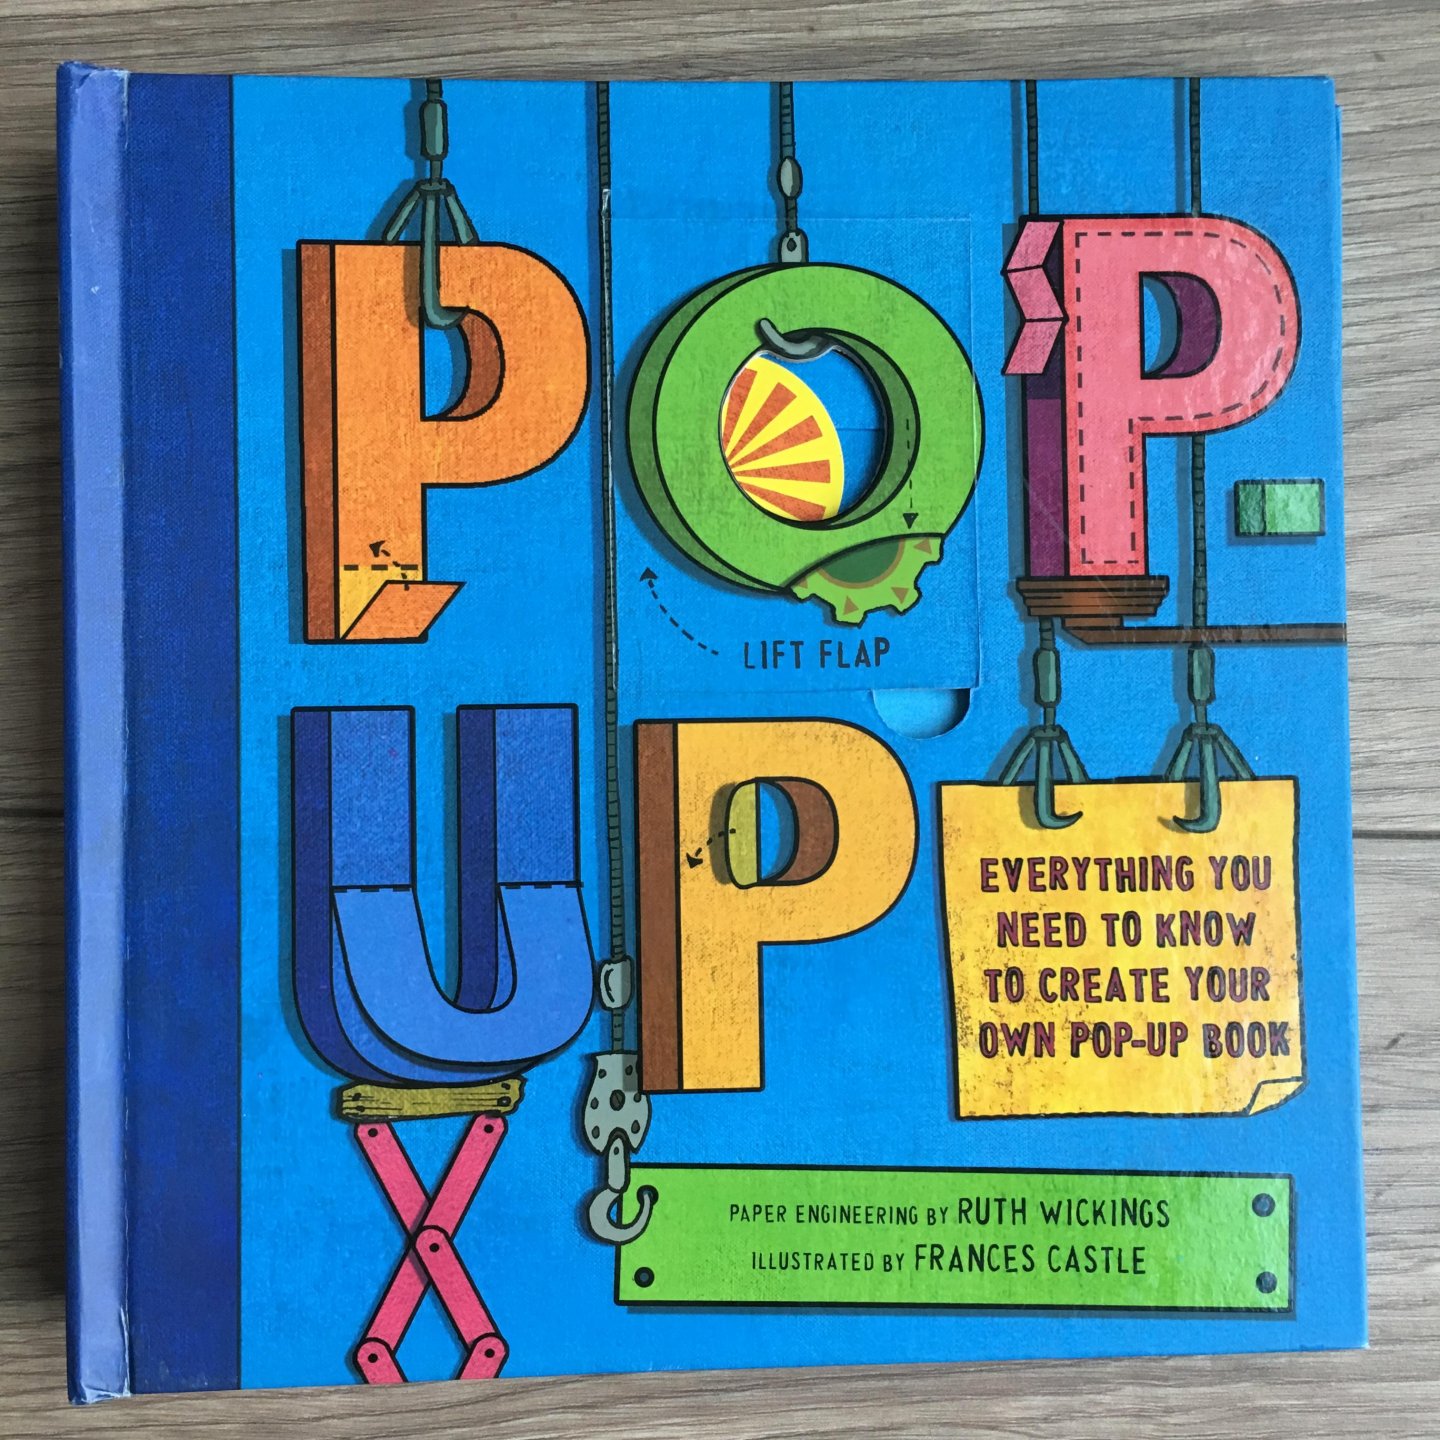 Wickings, Ruth (paper engineering) and Castle, Frances (illustration) - Pop-up Everyting you need to know to create your own pop-up book